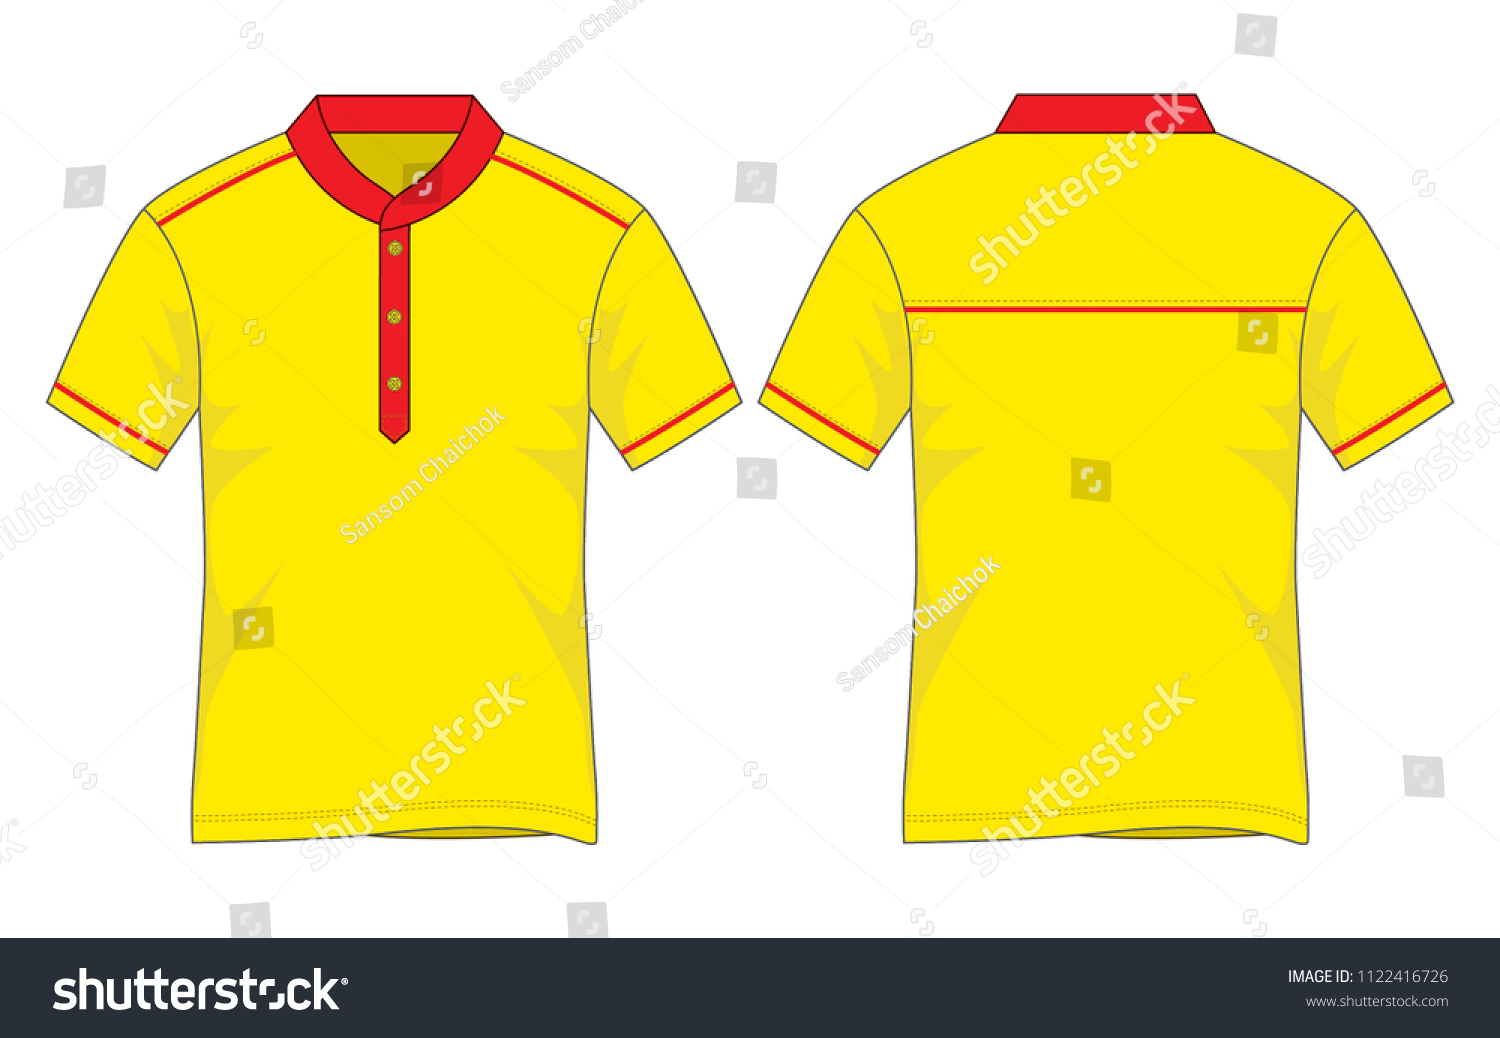 yellow and red shirt